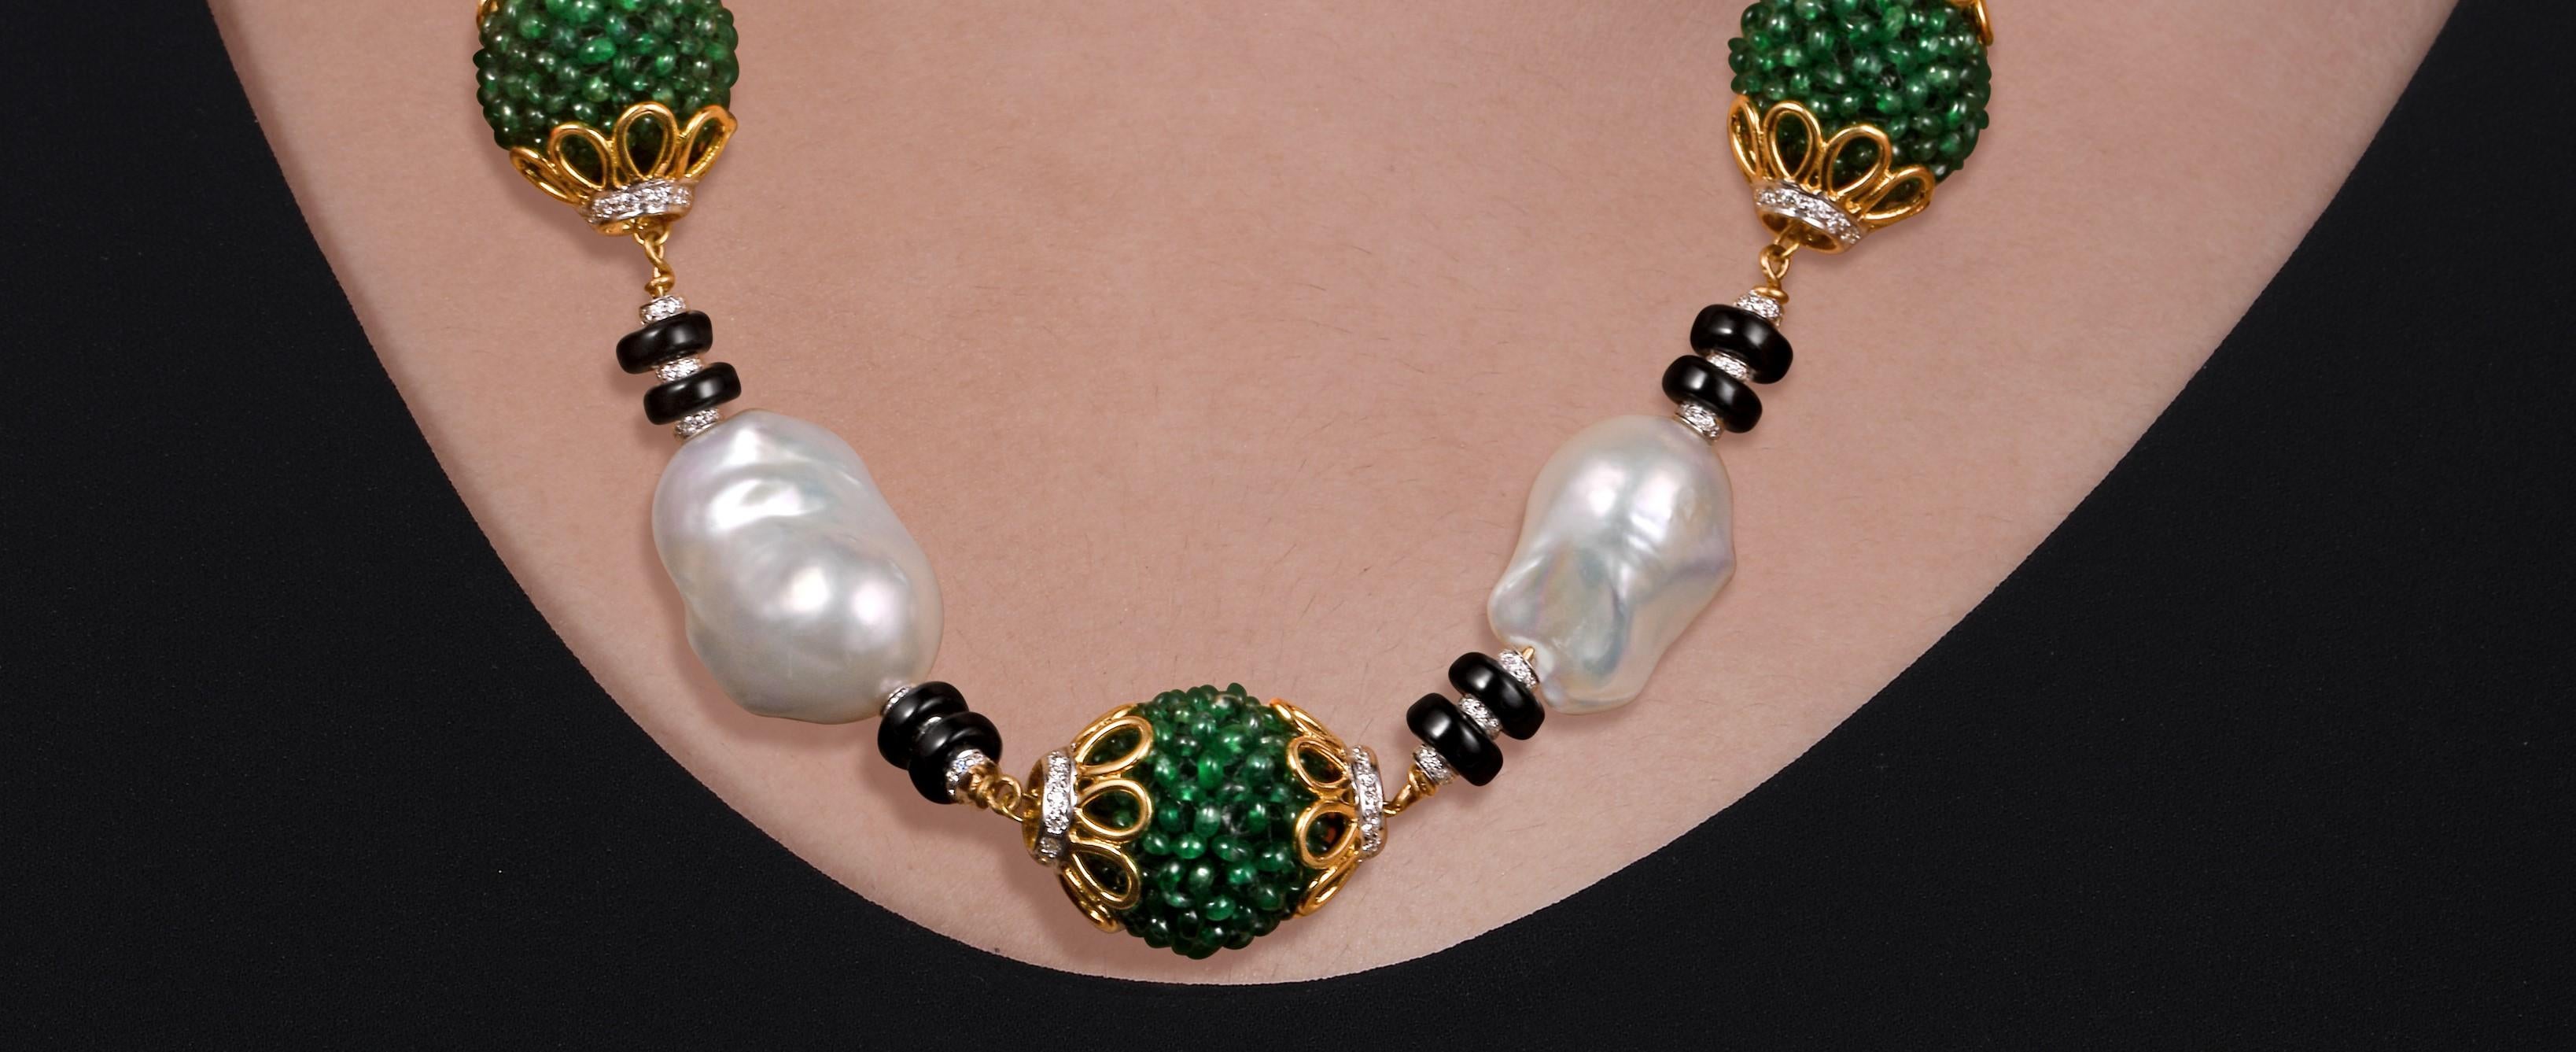 Round Cut H.Ajoomal Emerald Beads Barouqe Pearls Necklace with Black Onyx & Diamond Rings For Sale